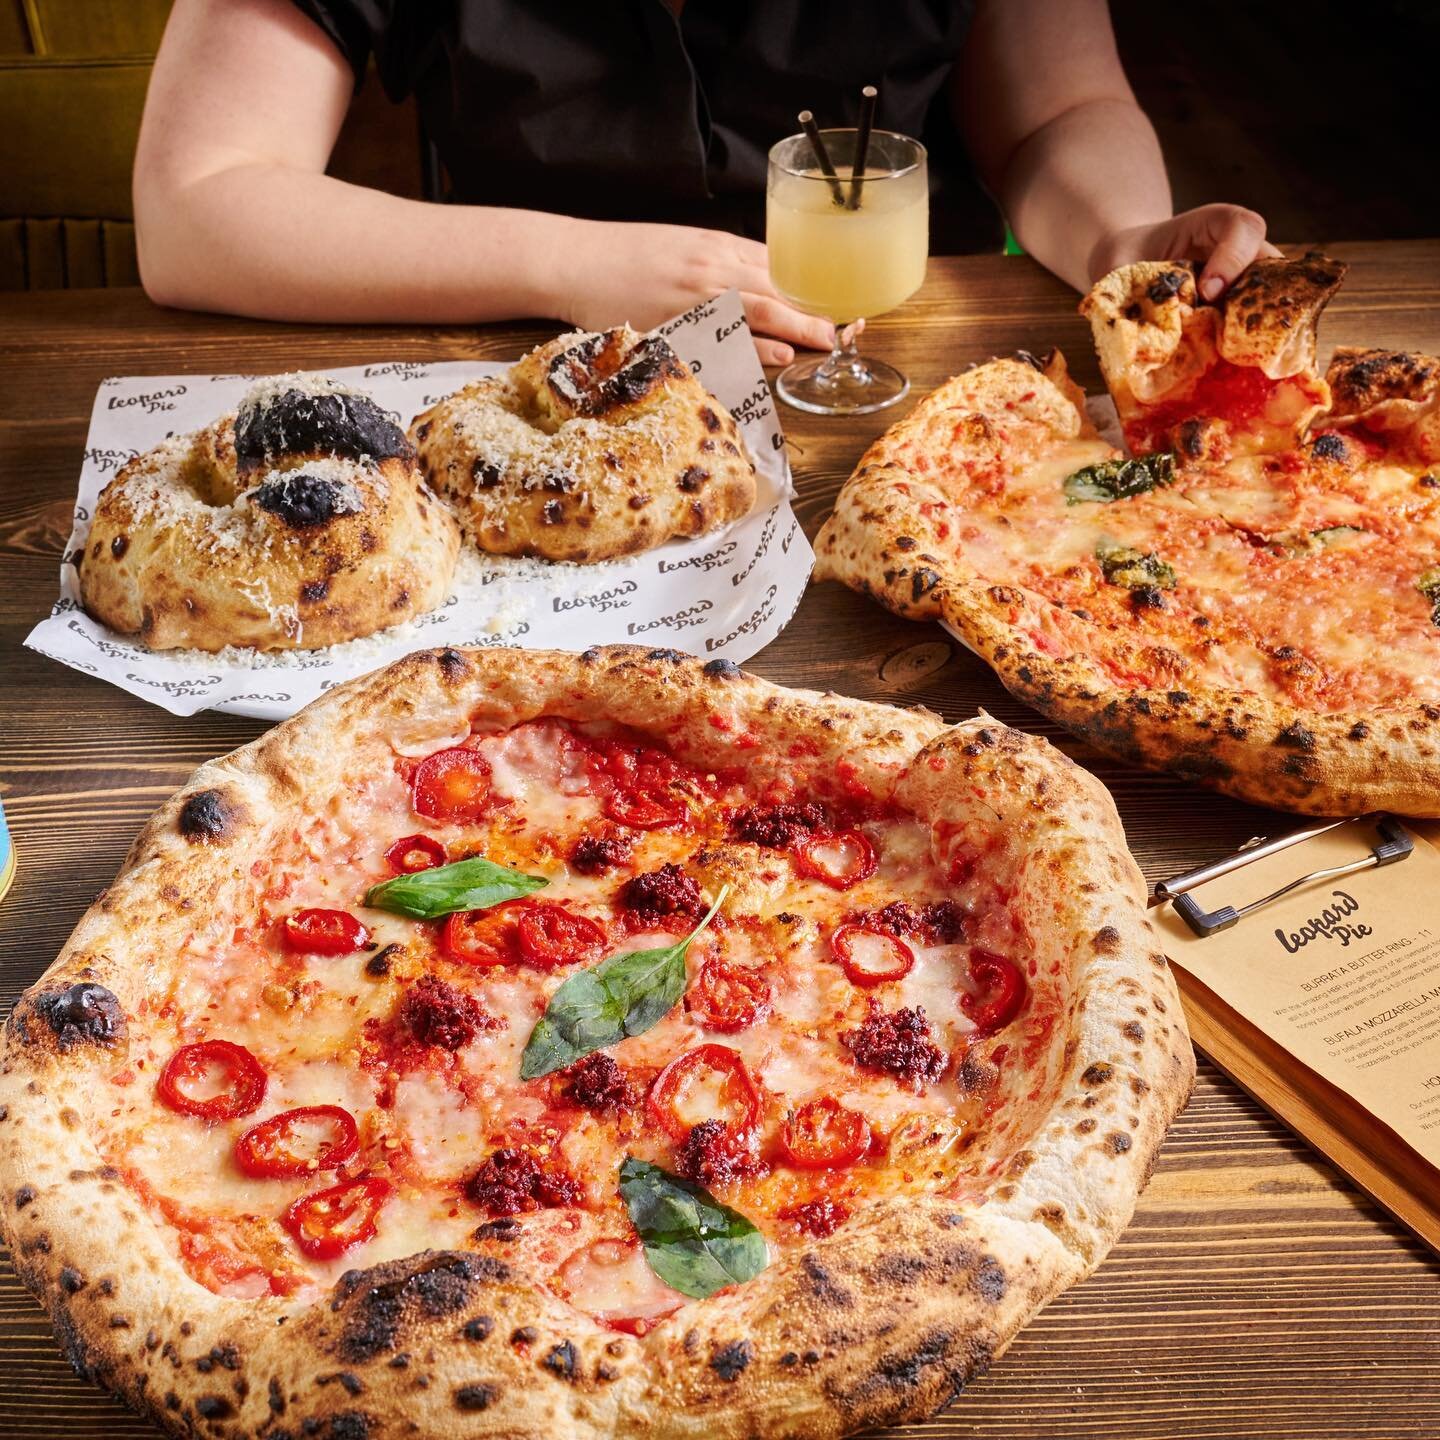 E V E R Y T H I N G  Y O U  N E E D 

All on one table. Pizza, Frozen Marg, HBR, looks like a perfect day out to me. Highly fermented dough that&rsquo;s good for your gut bacteria and micro biome. Who else can say that???? The difference is the atten